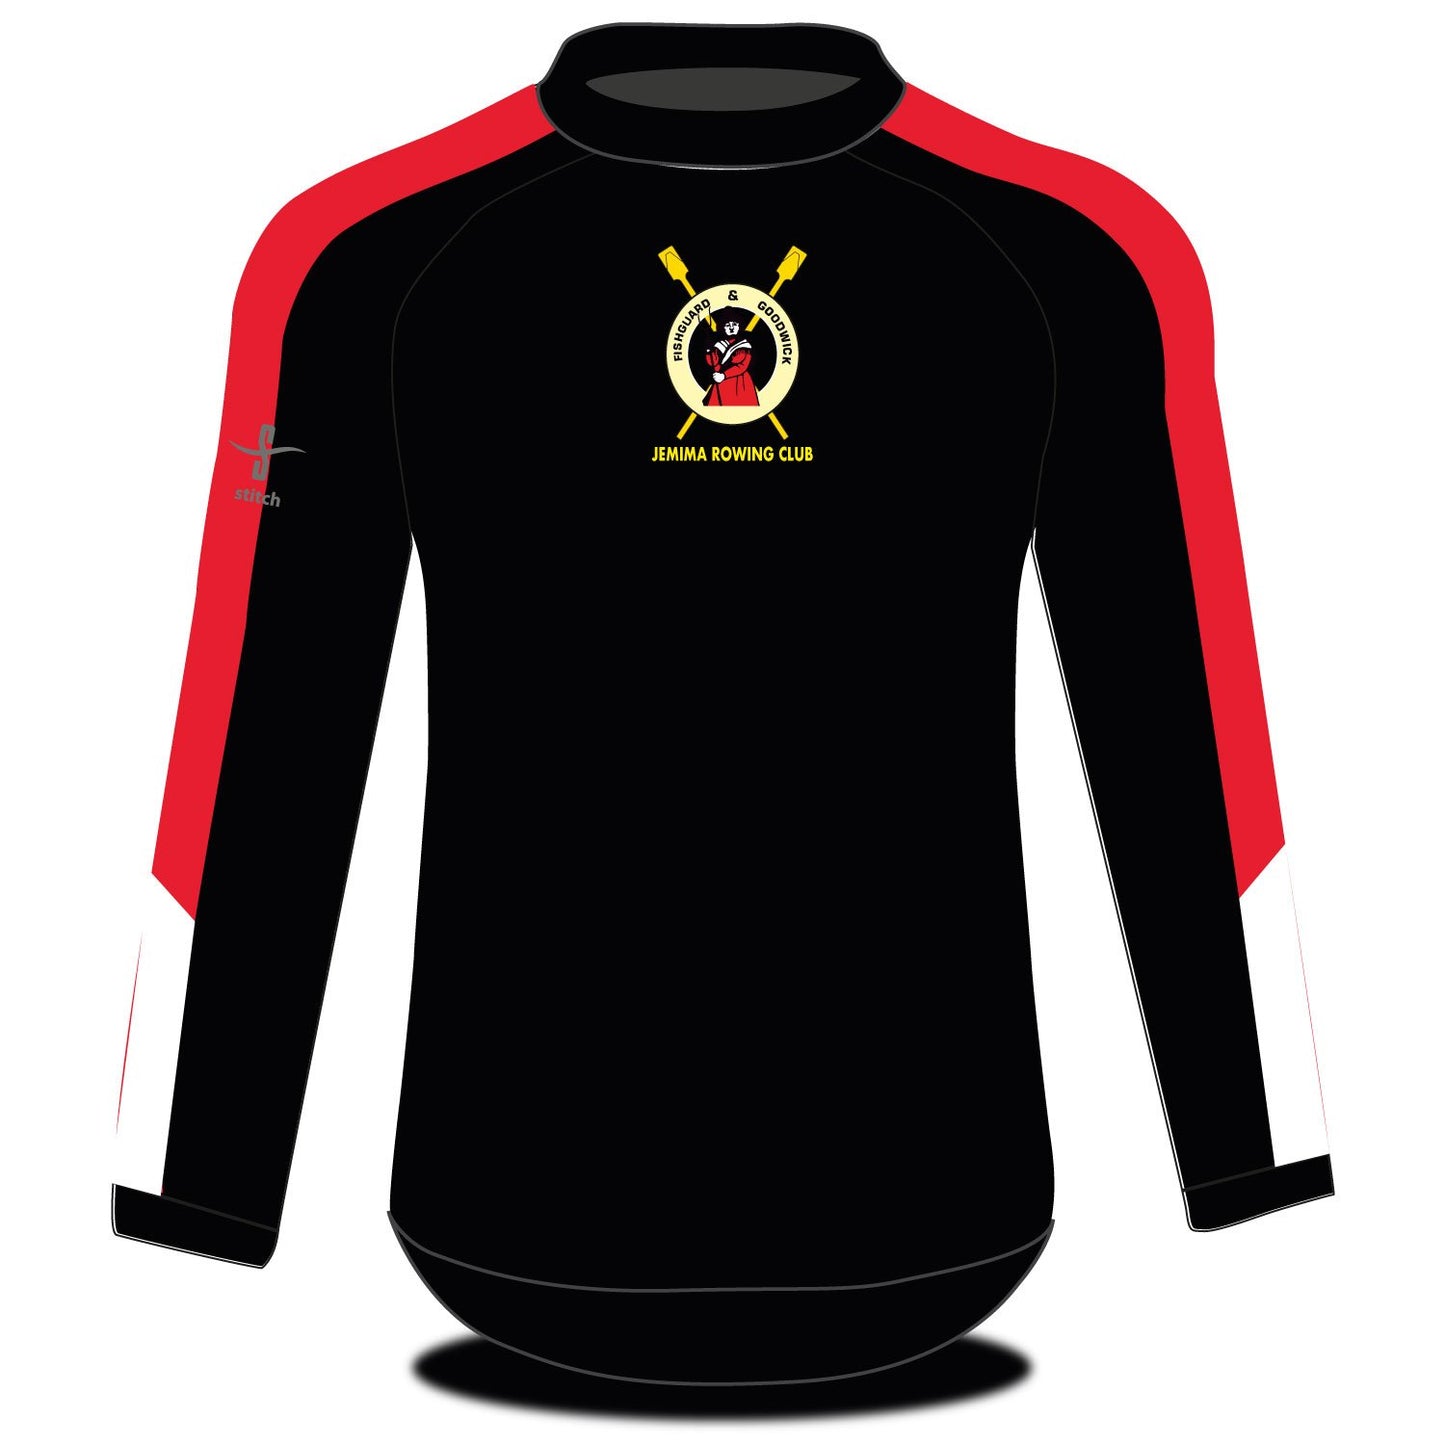 Fishguard and Goodwick Long Sleeved Tech Top